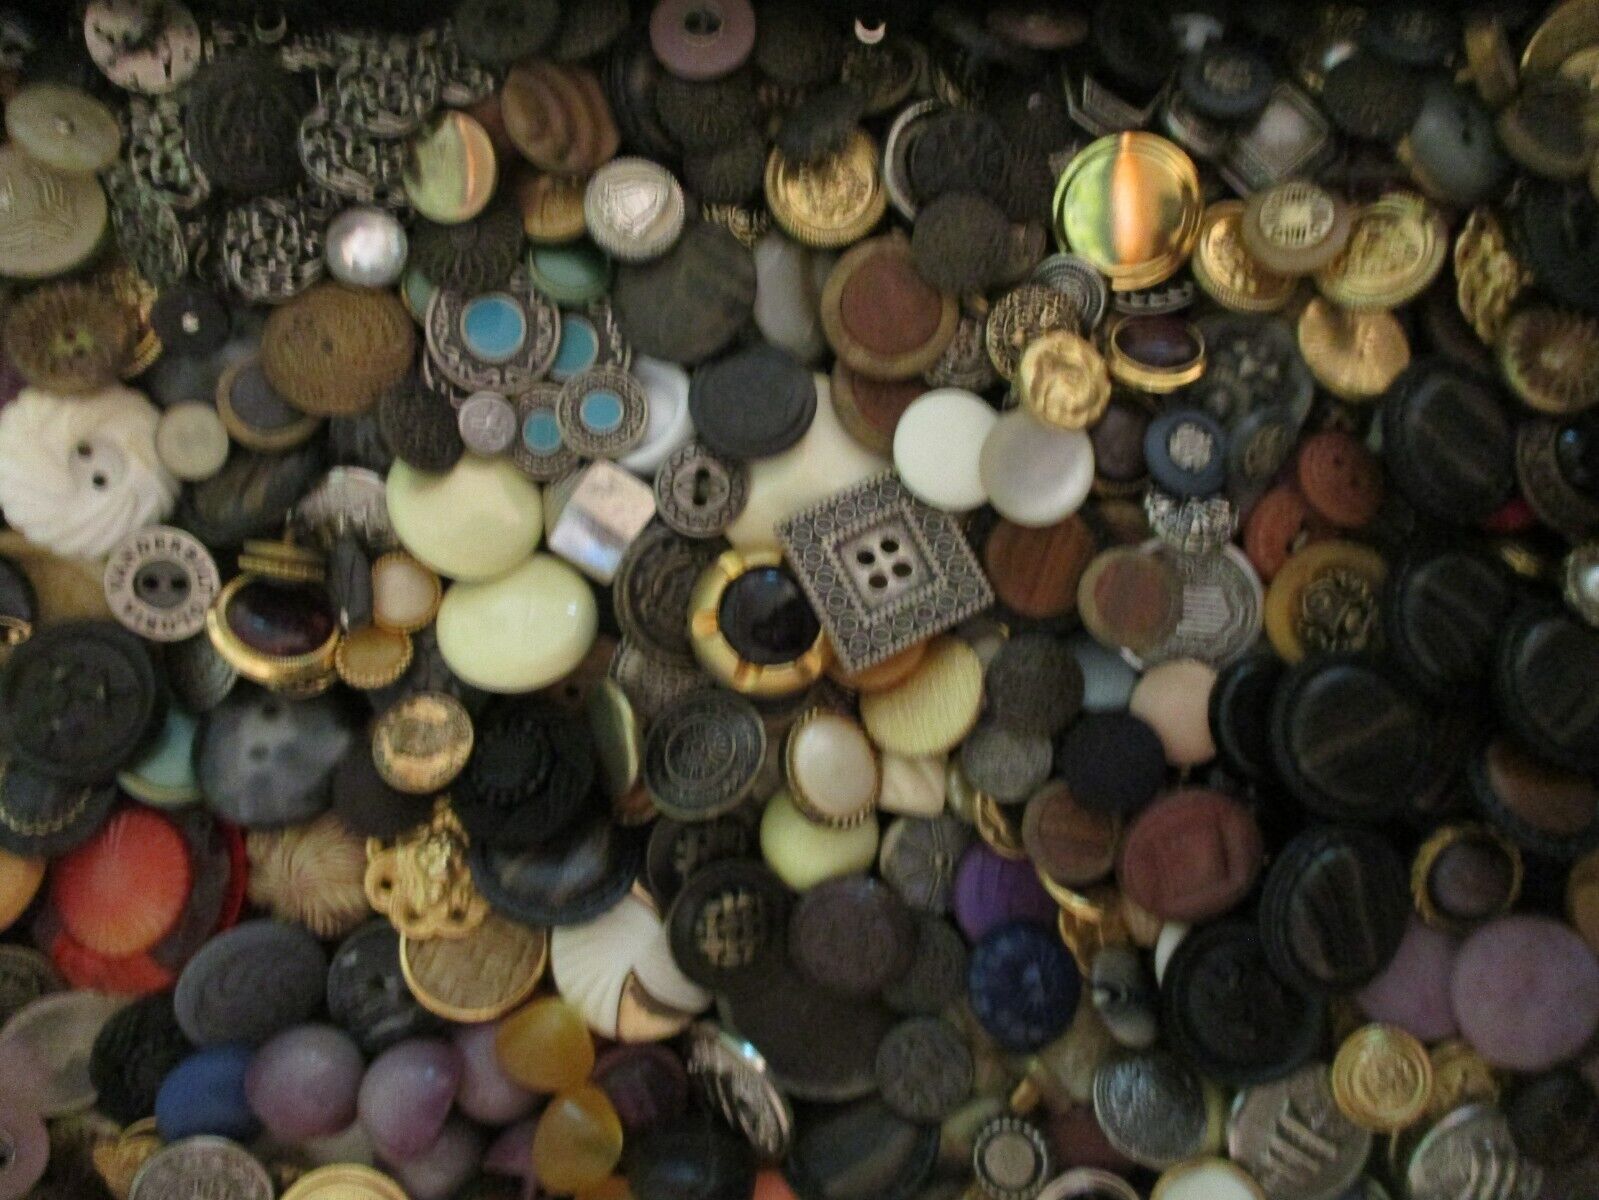 Huge Lot Decorative Buttons Shanks Metallic Plastic Vintage and New 1 1/2 Lbs.